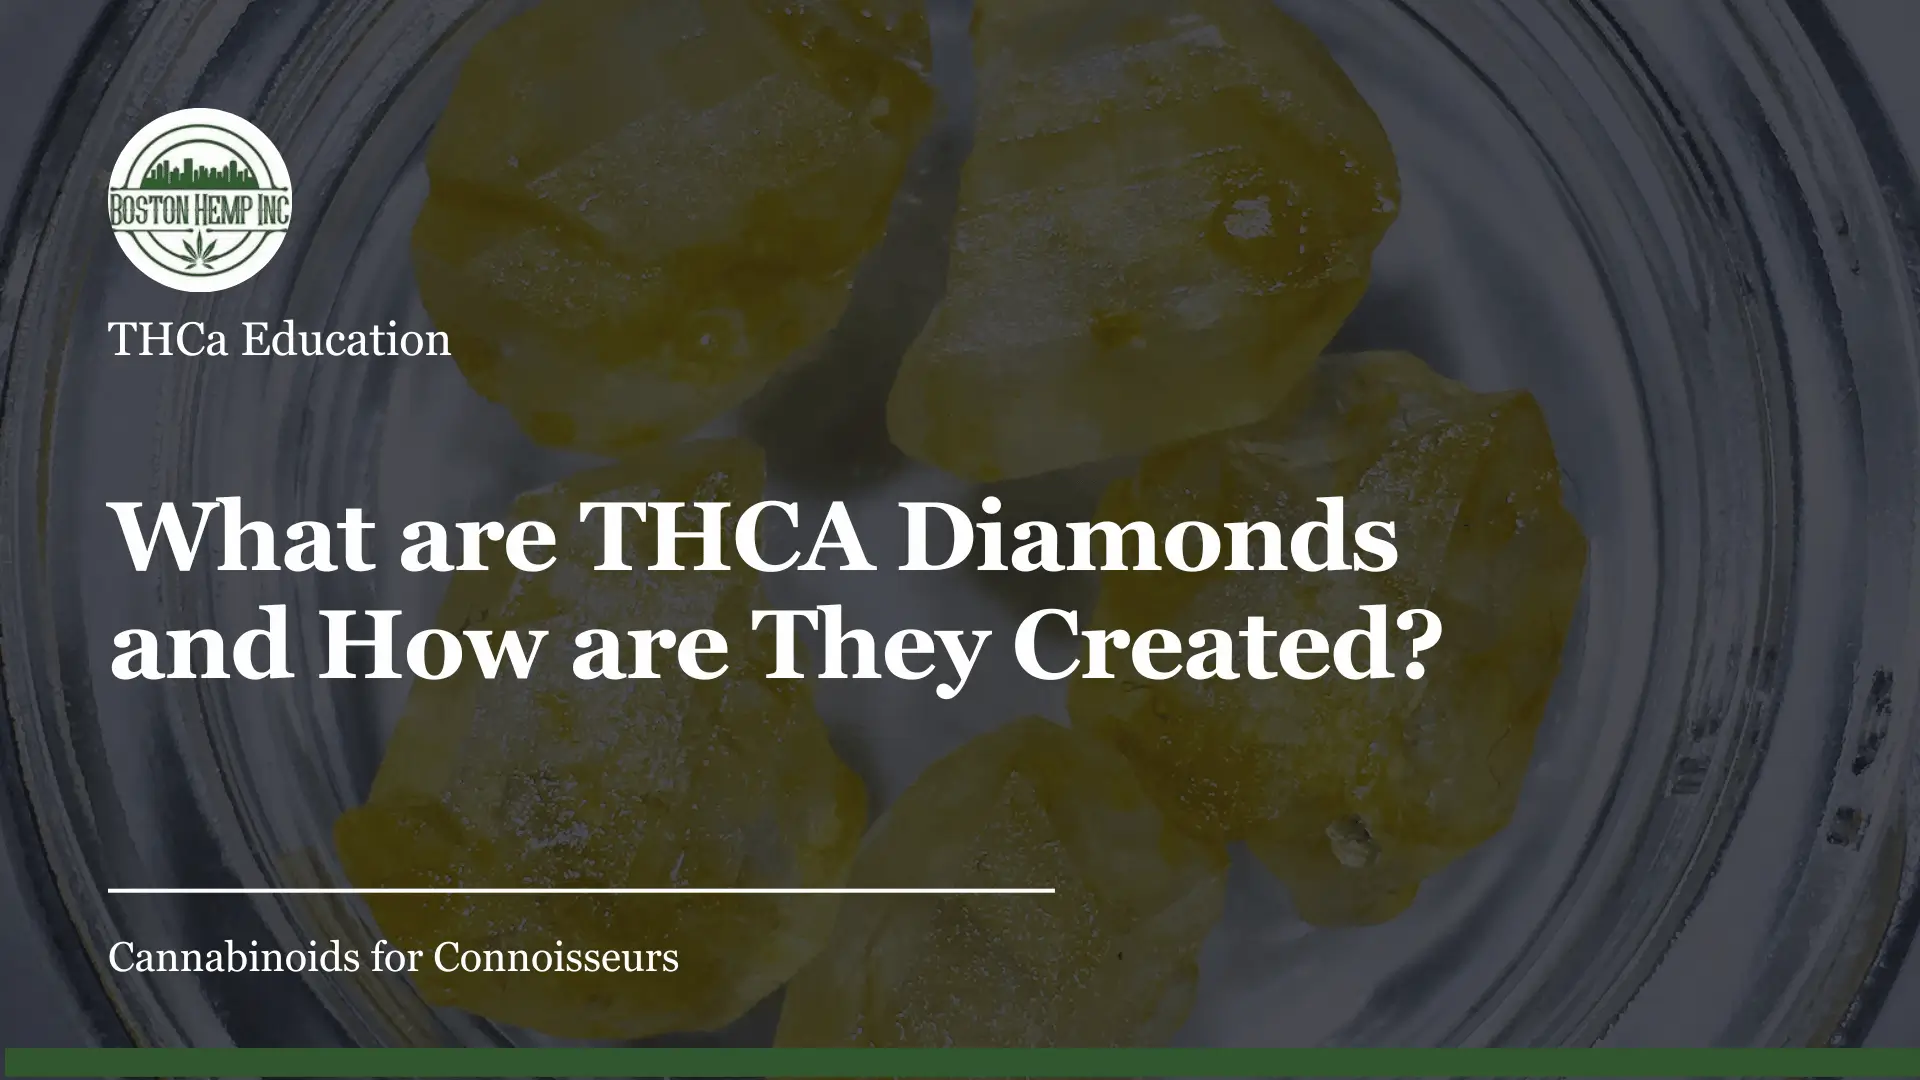 What are THCA Diamonds and How are they Created